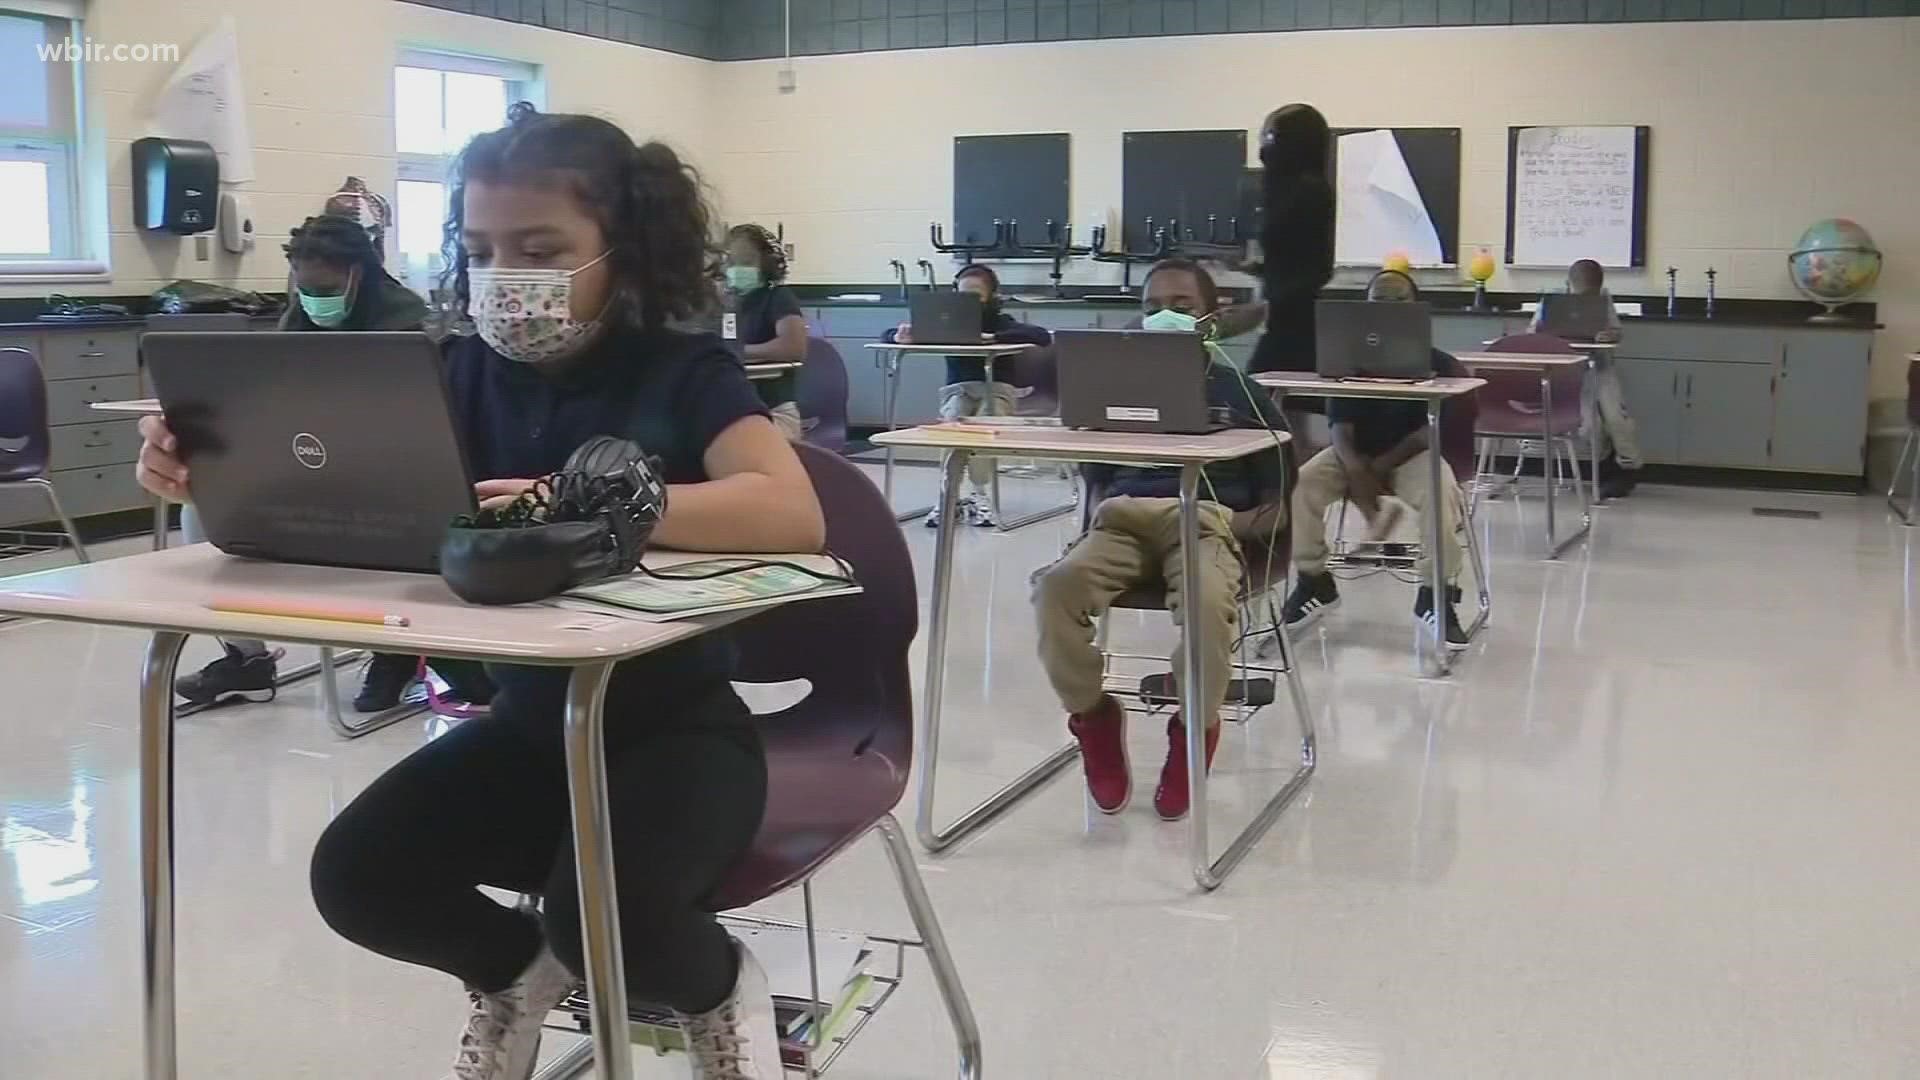 As COVID-19 cases rise in Knox County Schools, some parents are pleading for a mask mandate while others say they don't want the rule.